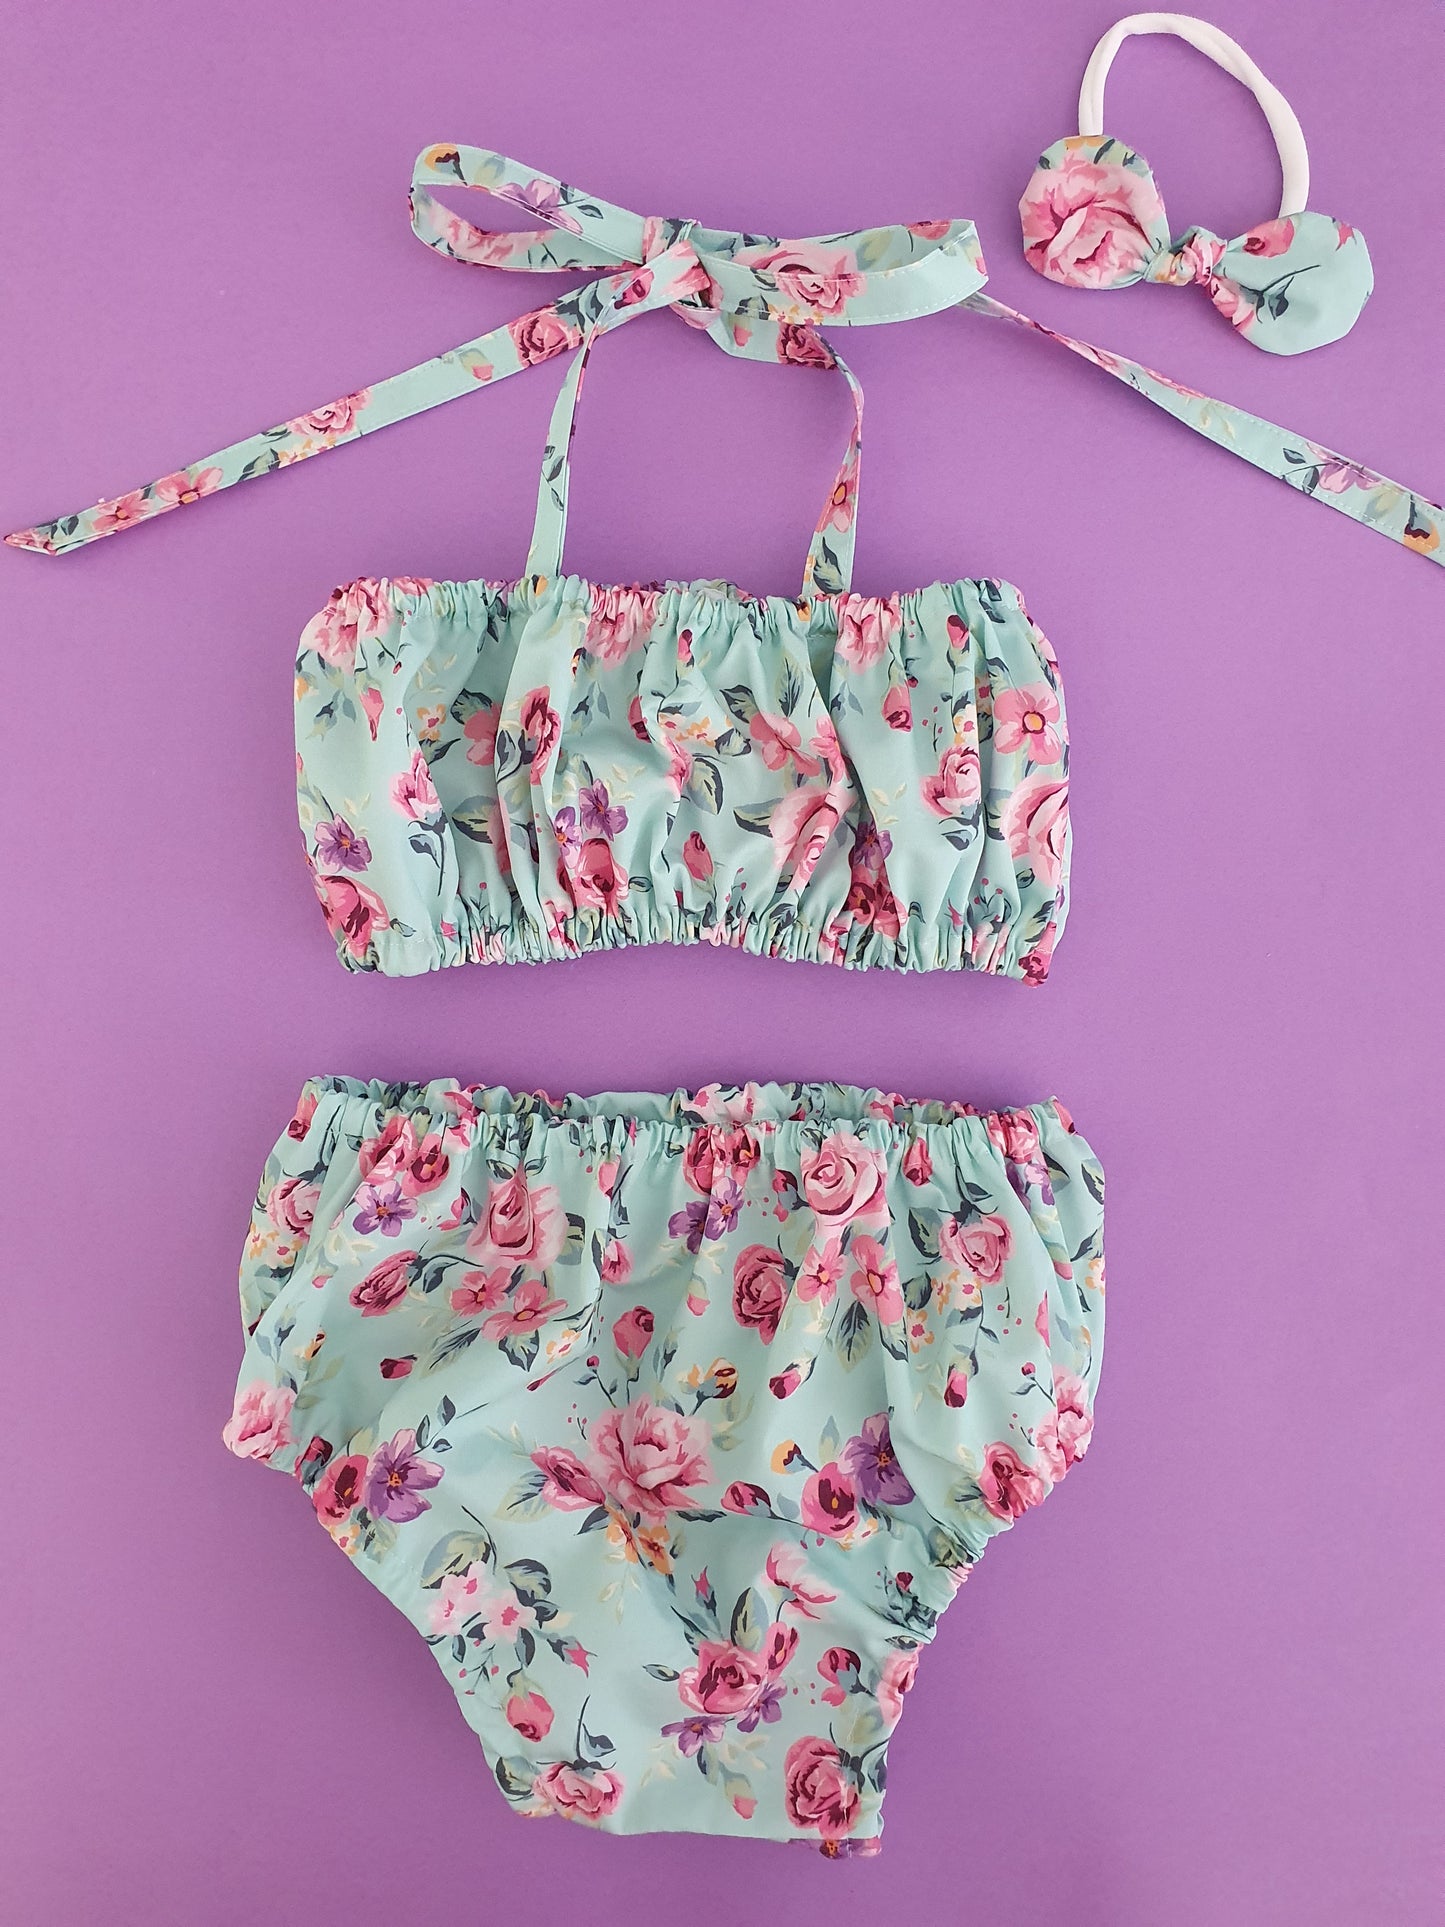 Floral Girls 1st Birthday - Cake Smash Outfit, Size 1, Nappy Cover, Headband & Crop Top Set - AQUA FLORAL